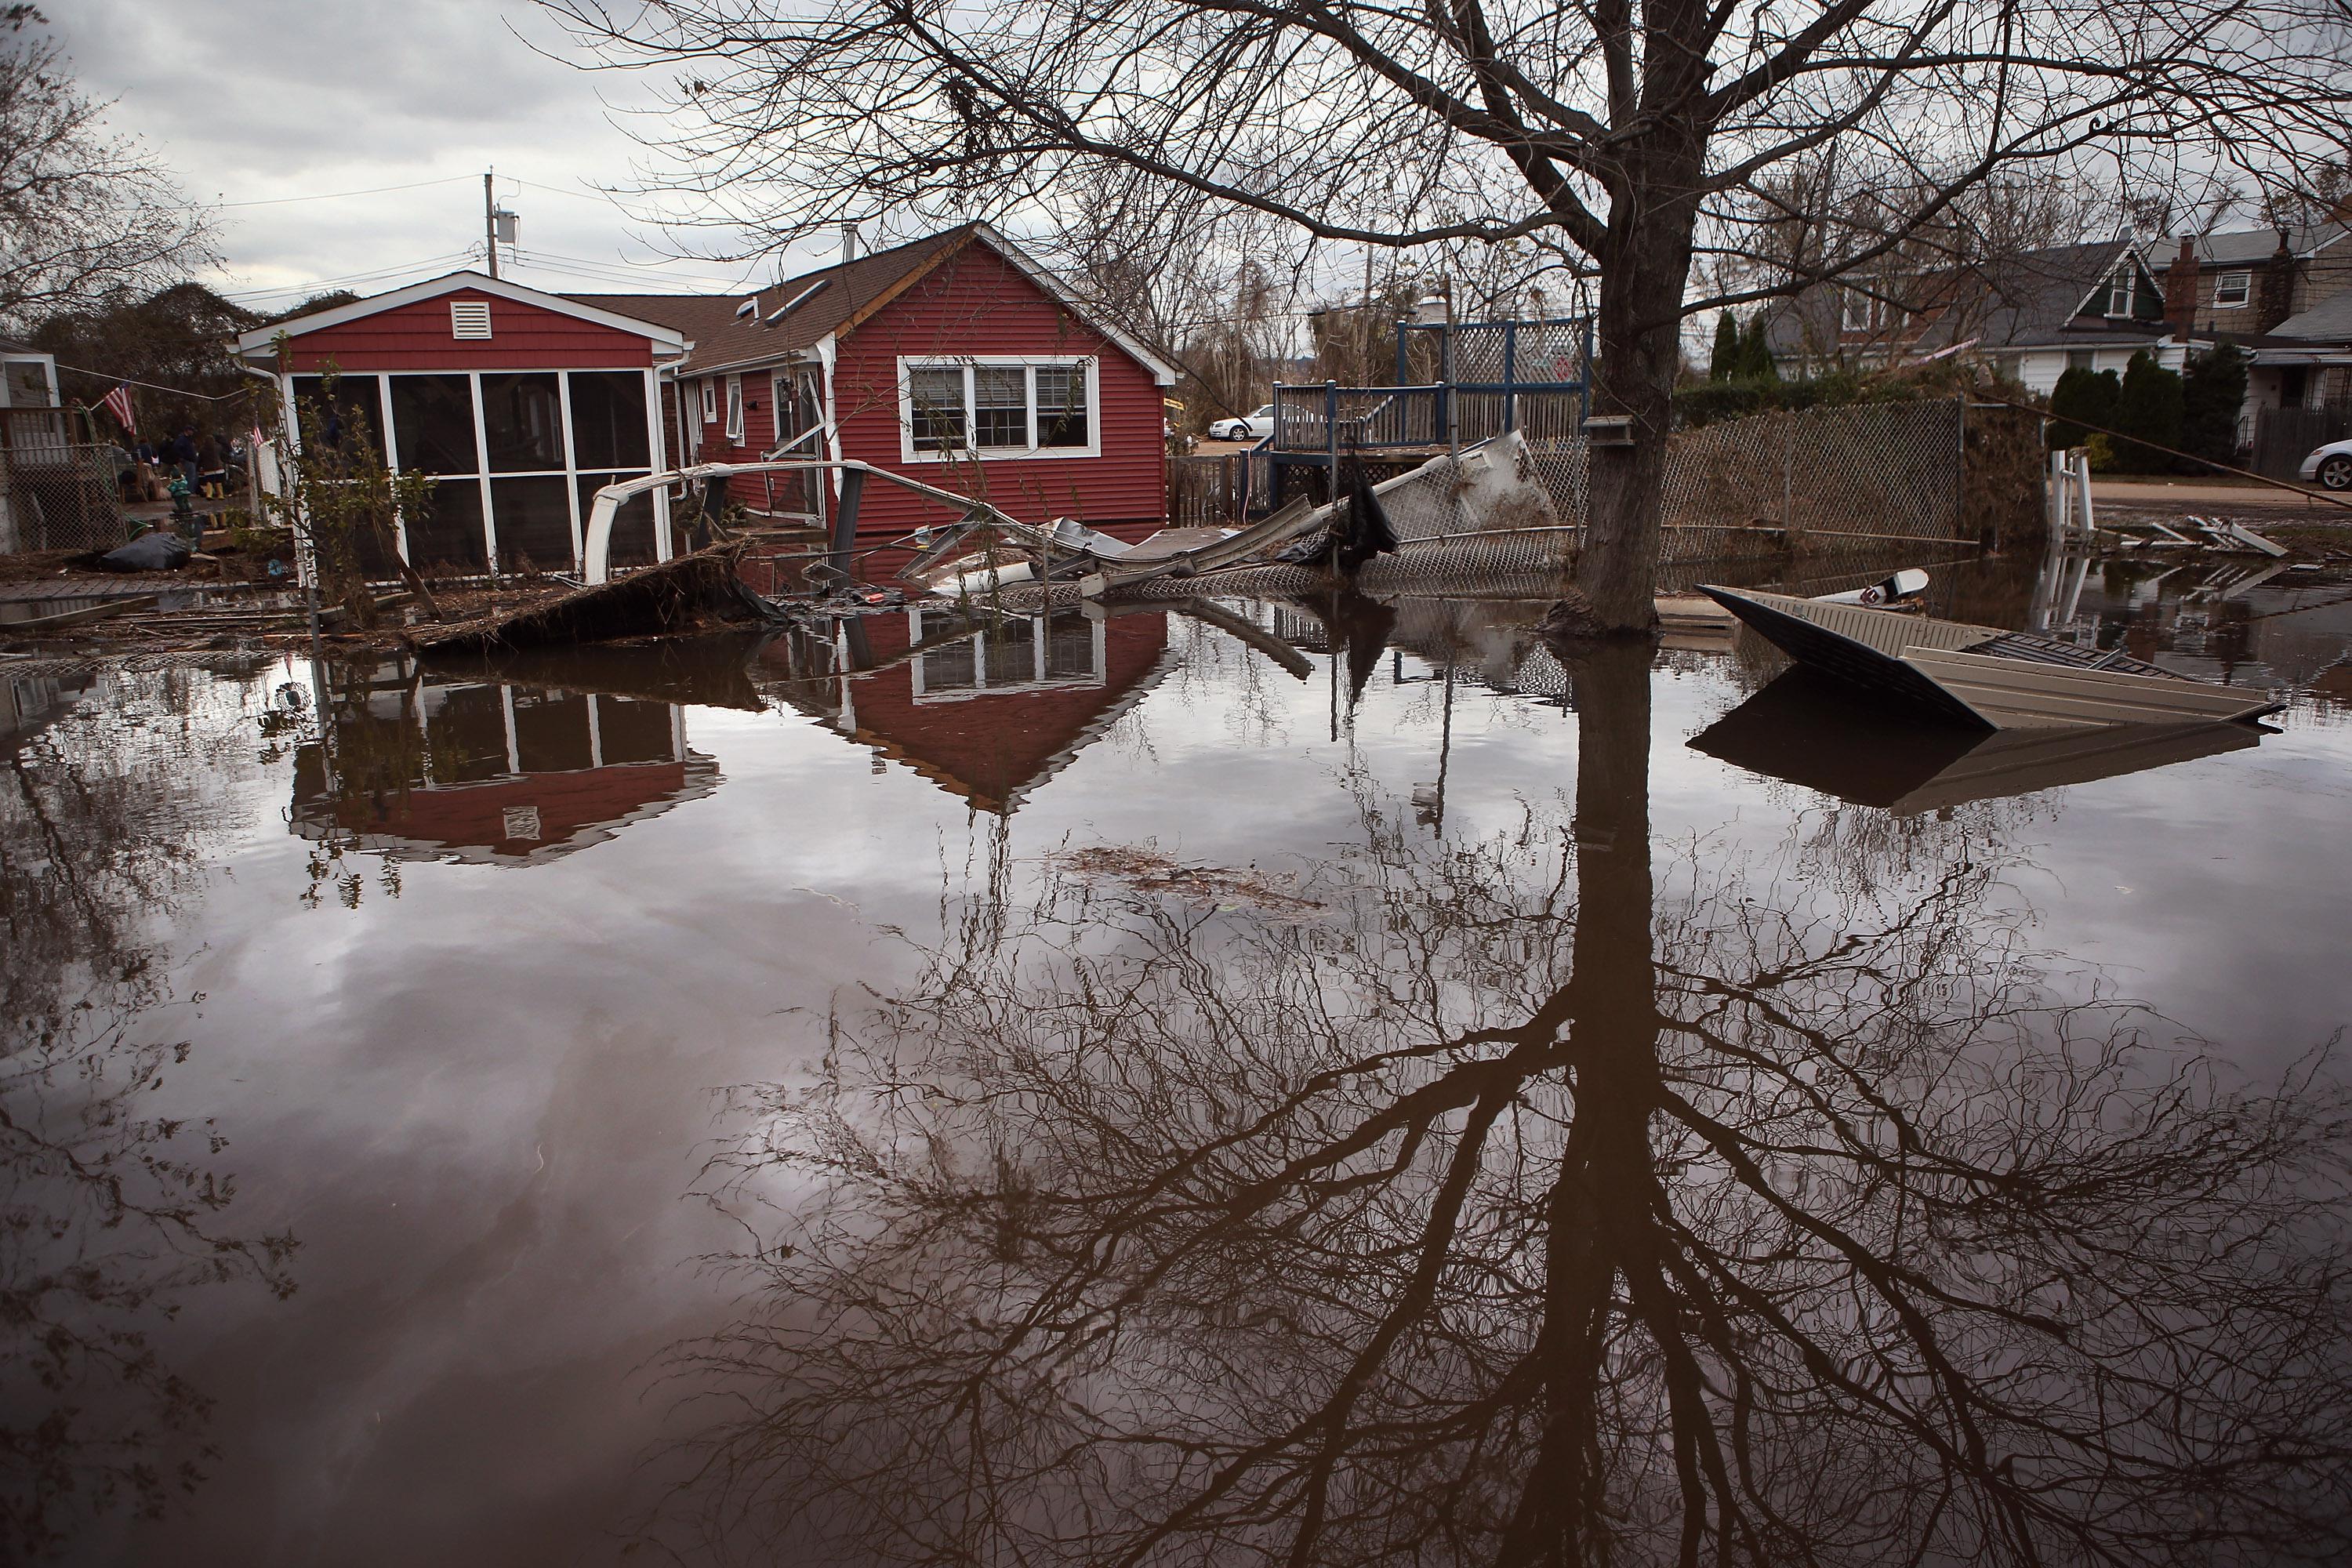 Water continues to flood a neighborhood on November 1, 2012 in the Ocean Breeze area of the Staten Island borough of New York City.